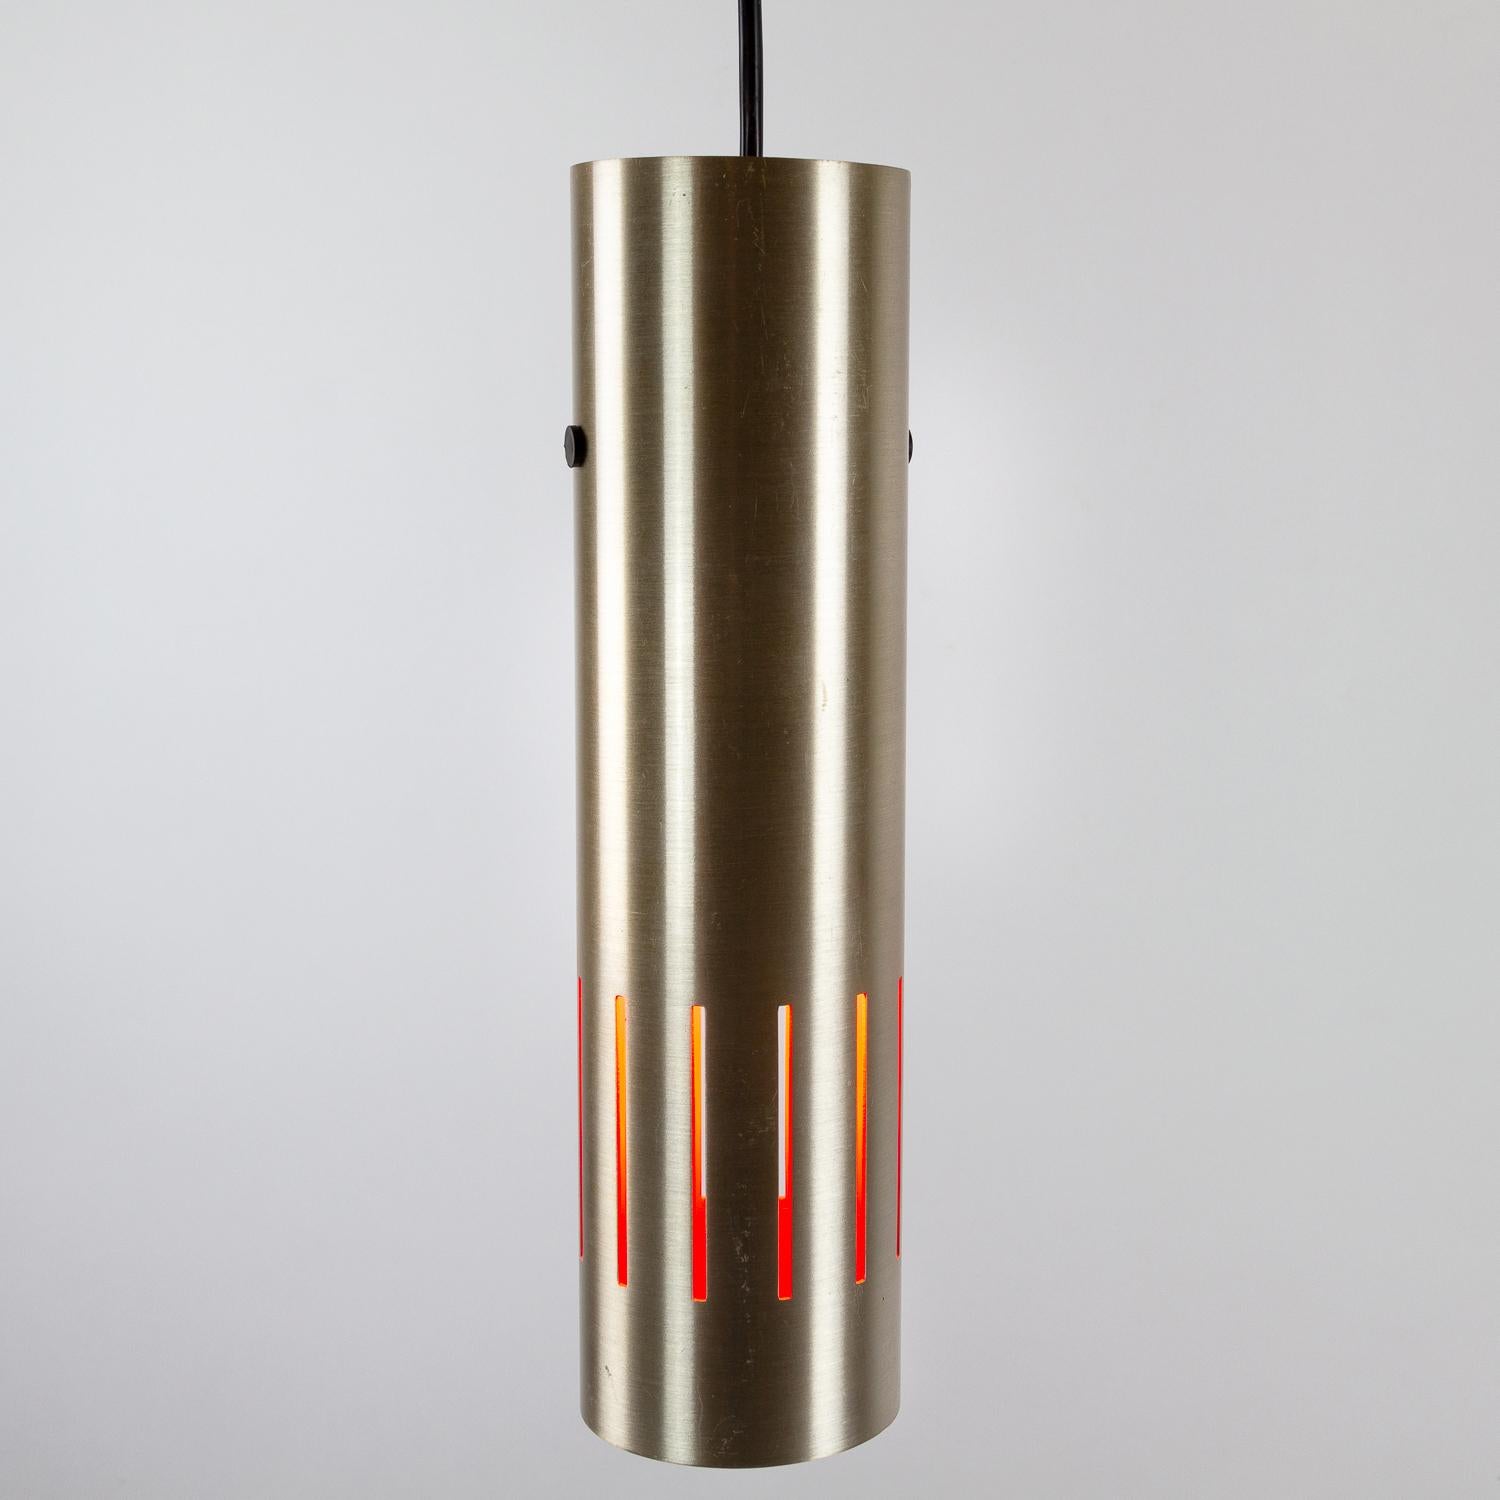 A Jo Hammerborg Trombone pendant in brass with orange interior. Designed in 1968 and produced by Fog & Mørup, Denmark. Patina as expected.

 